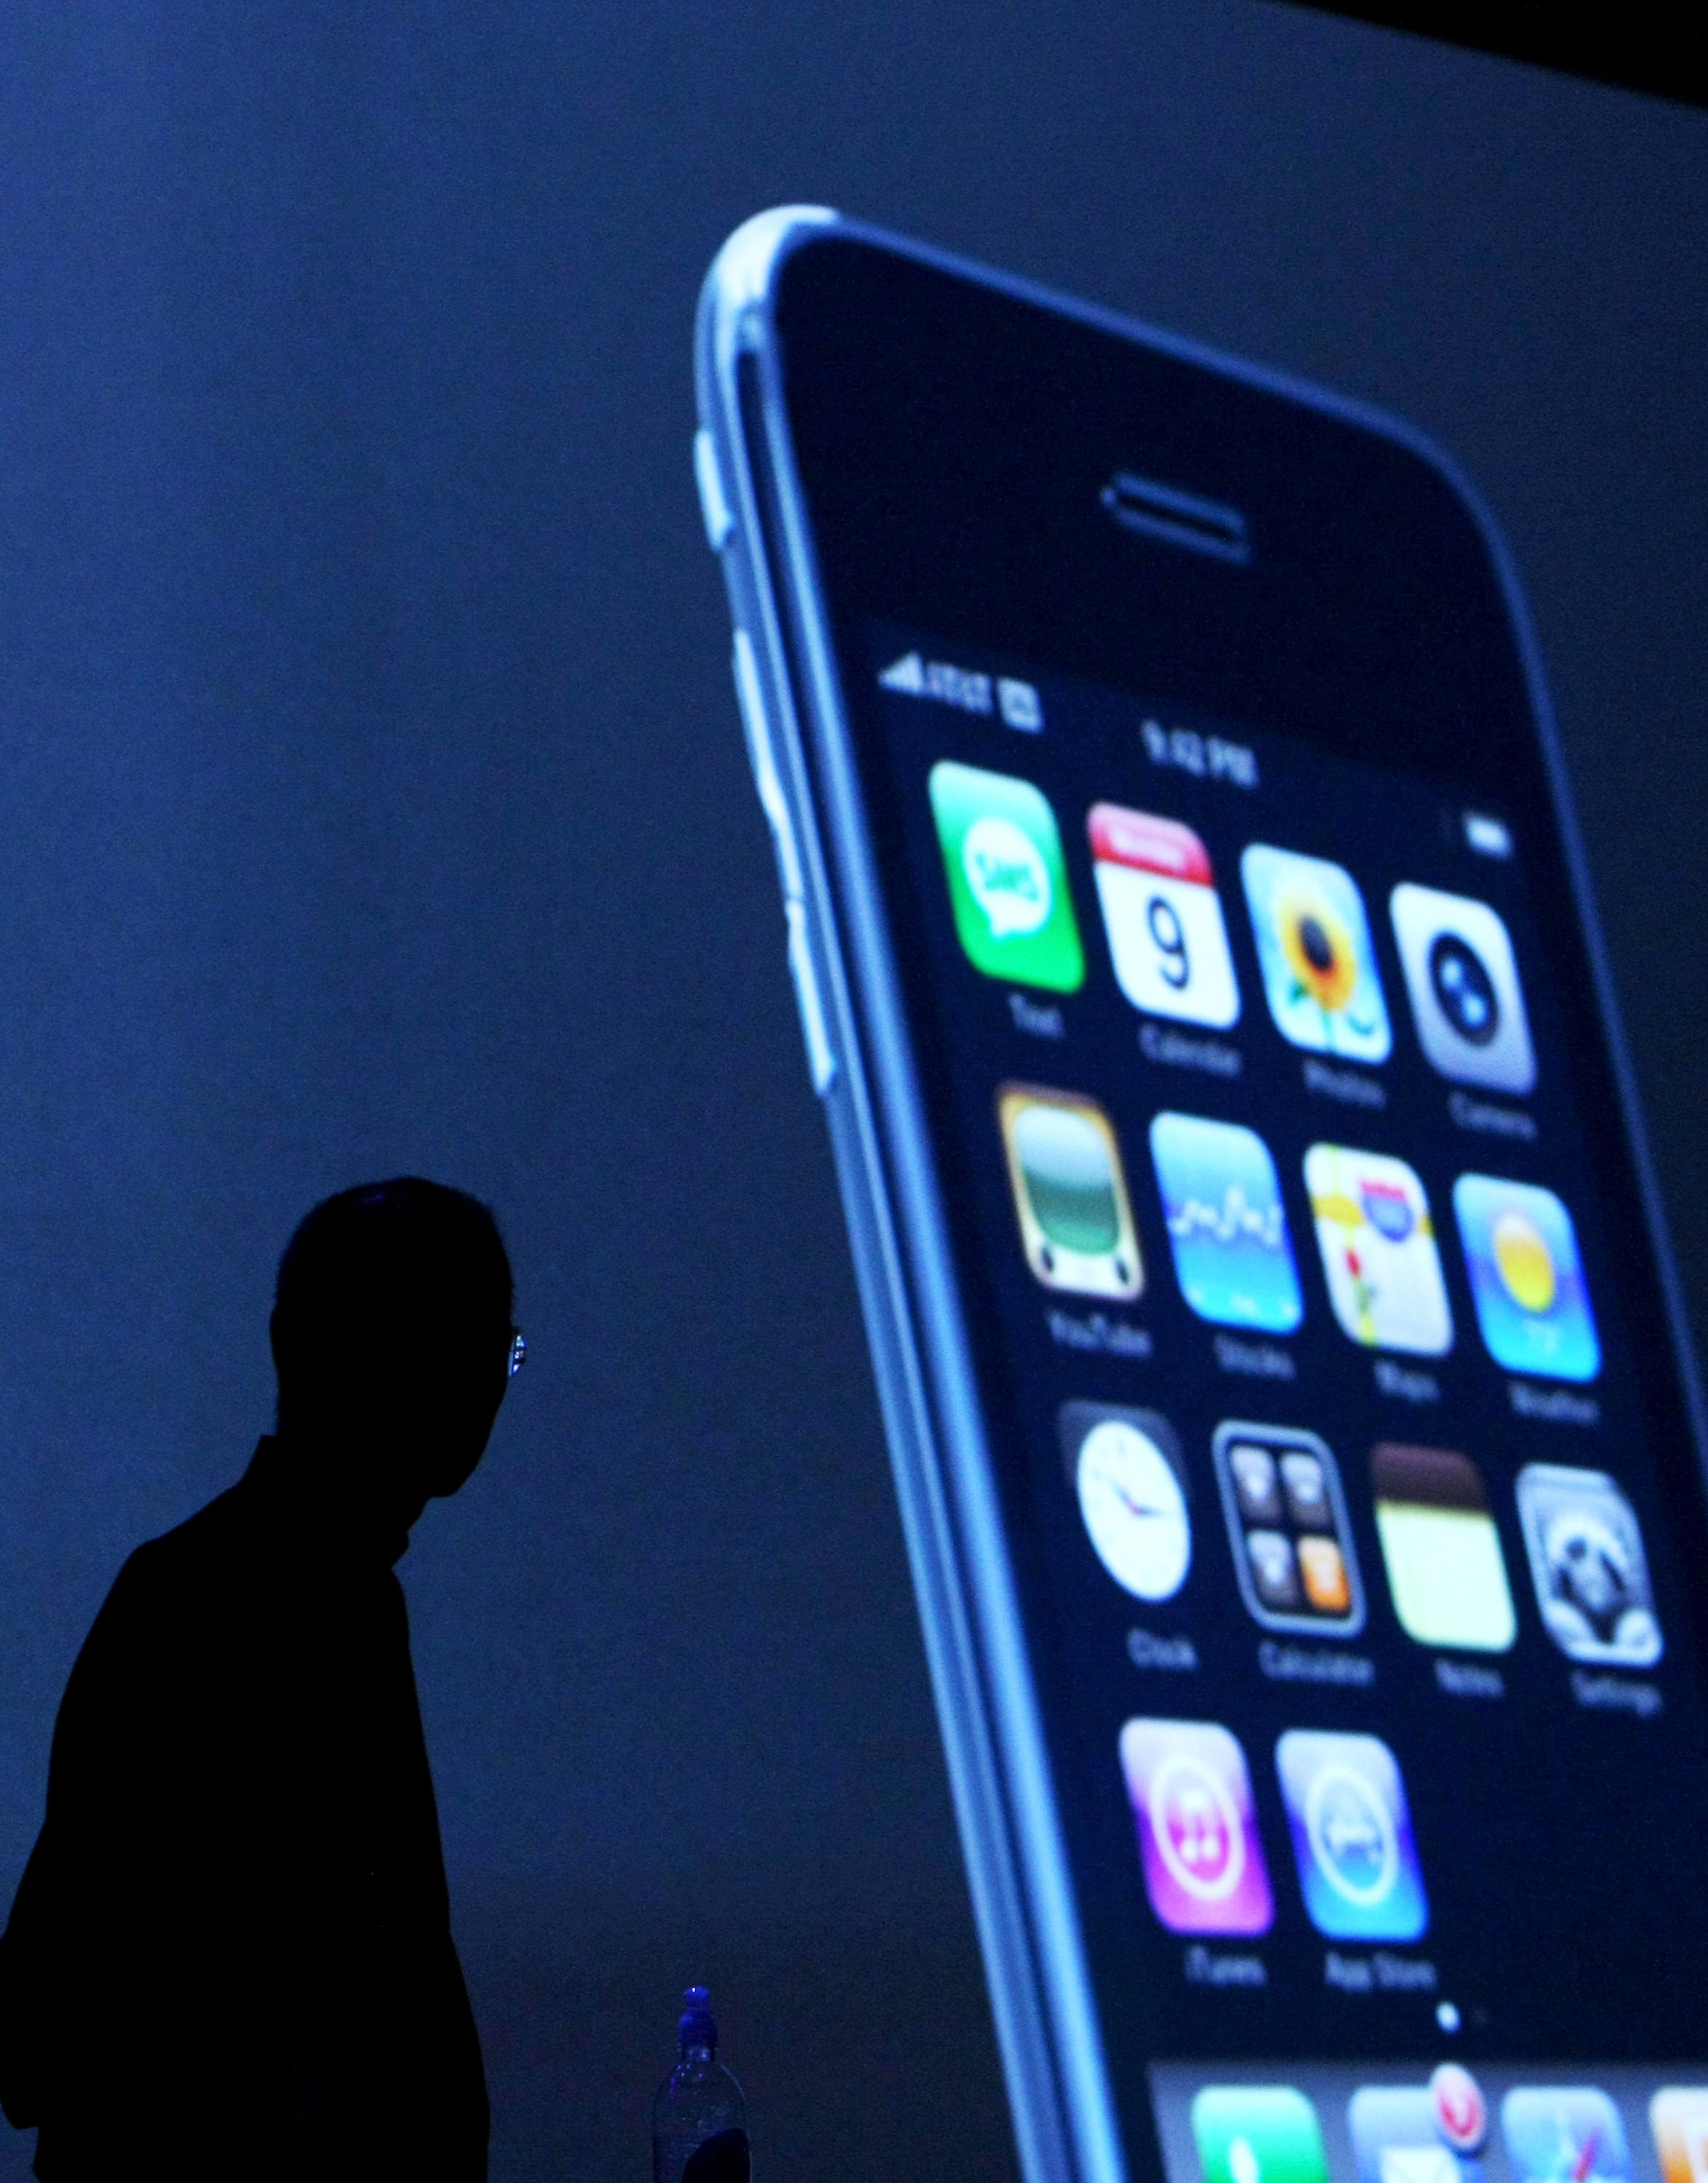 Steve Jobs stands in the shadows of the iPhone release.